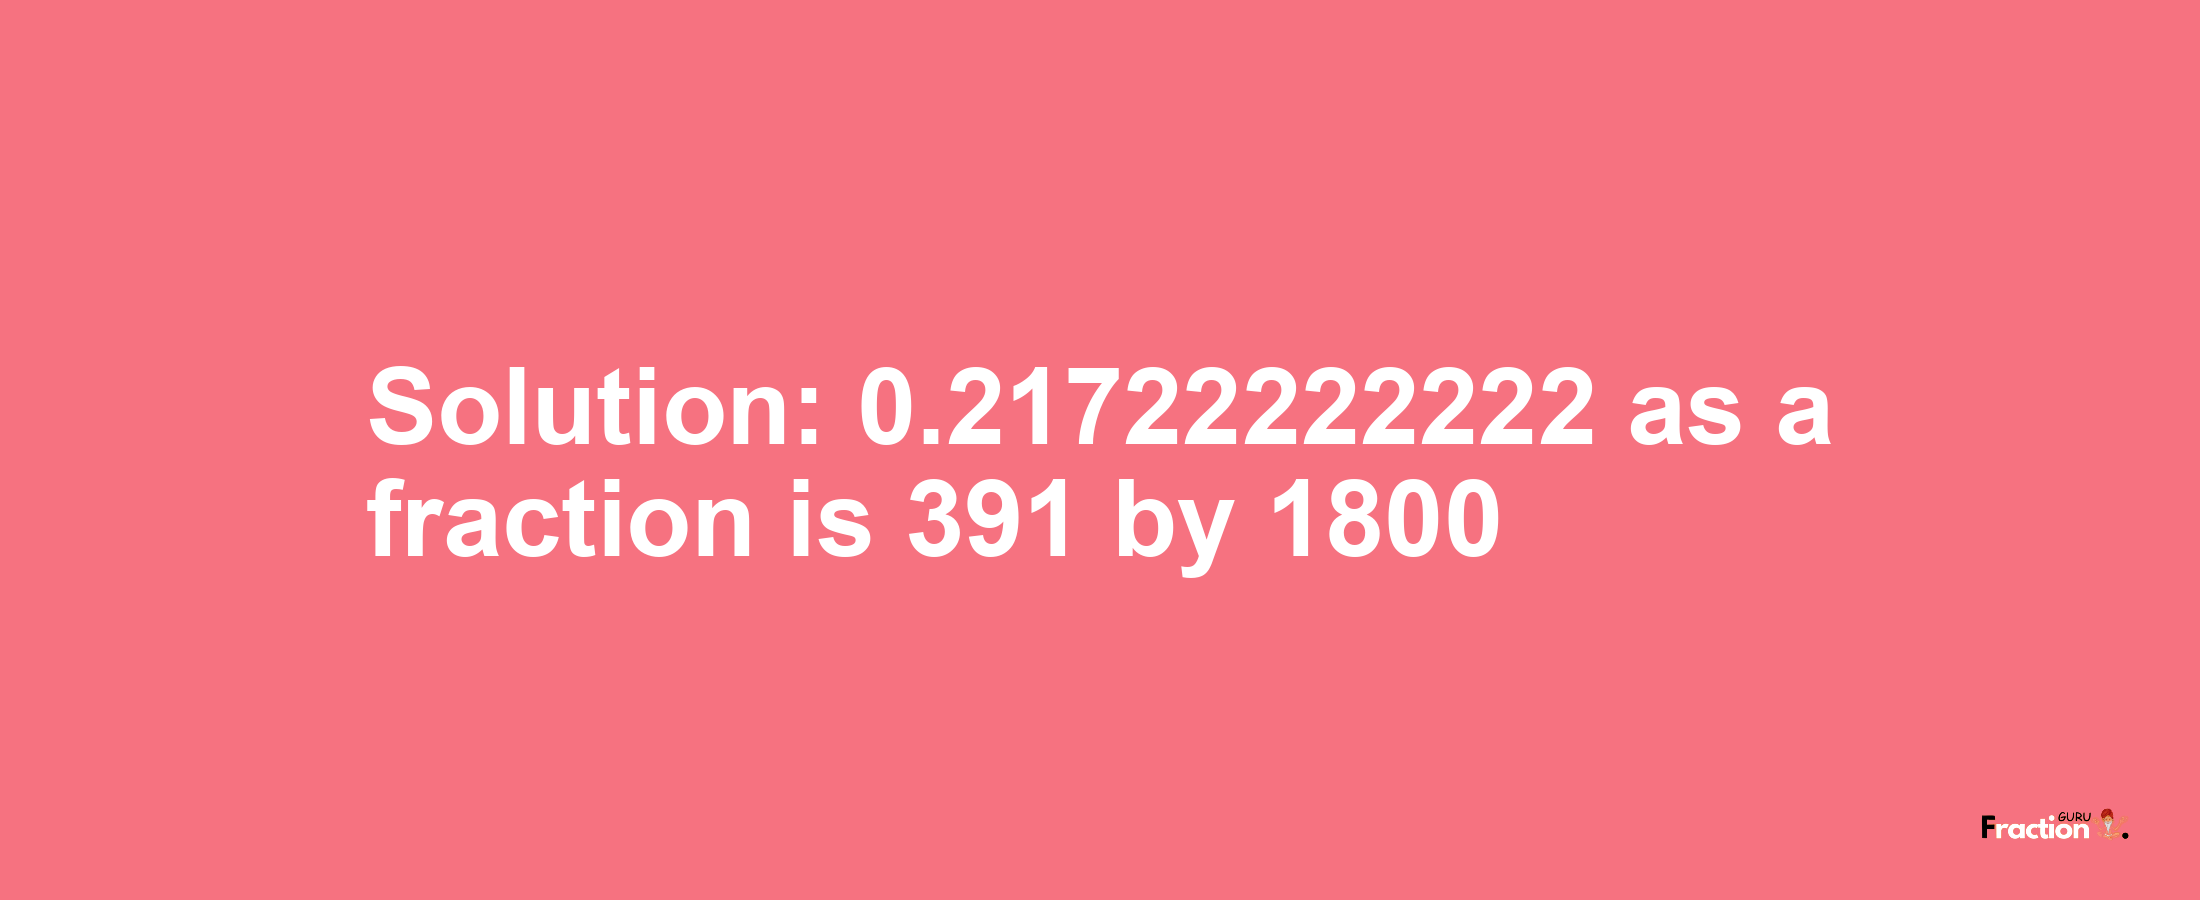 Solution:0.21722222222 as a fraction is 391/1800